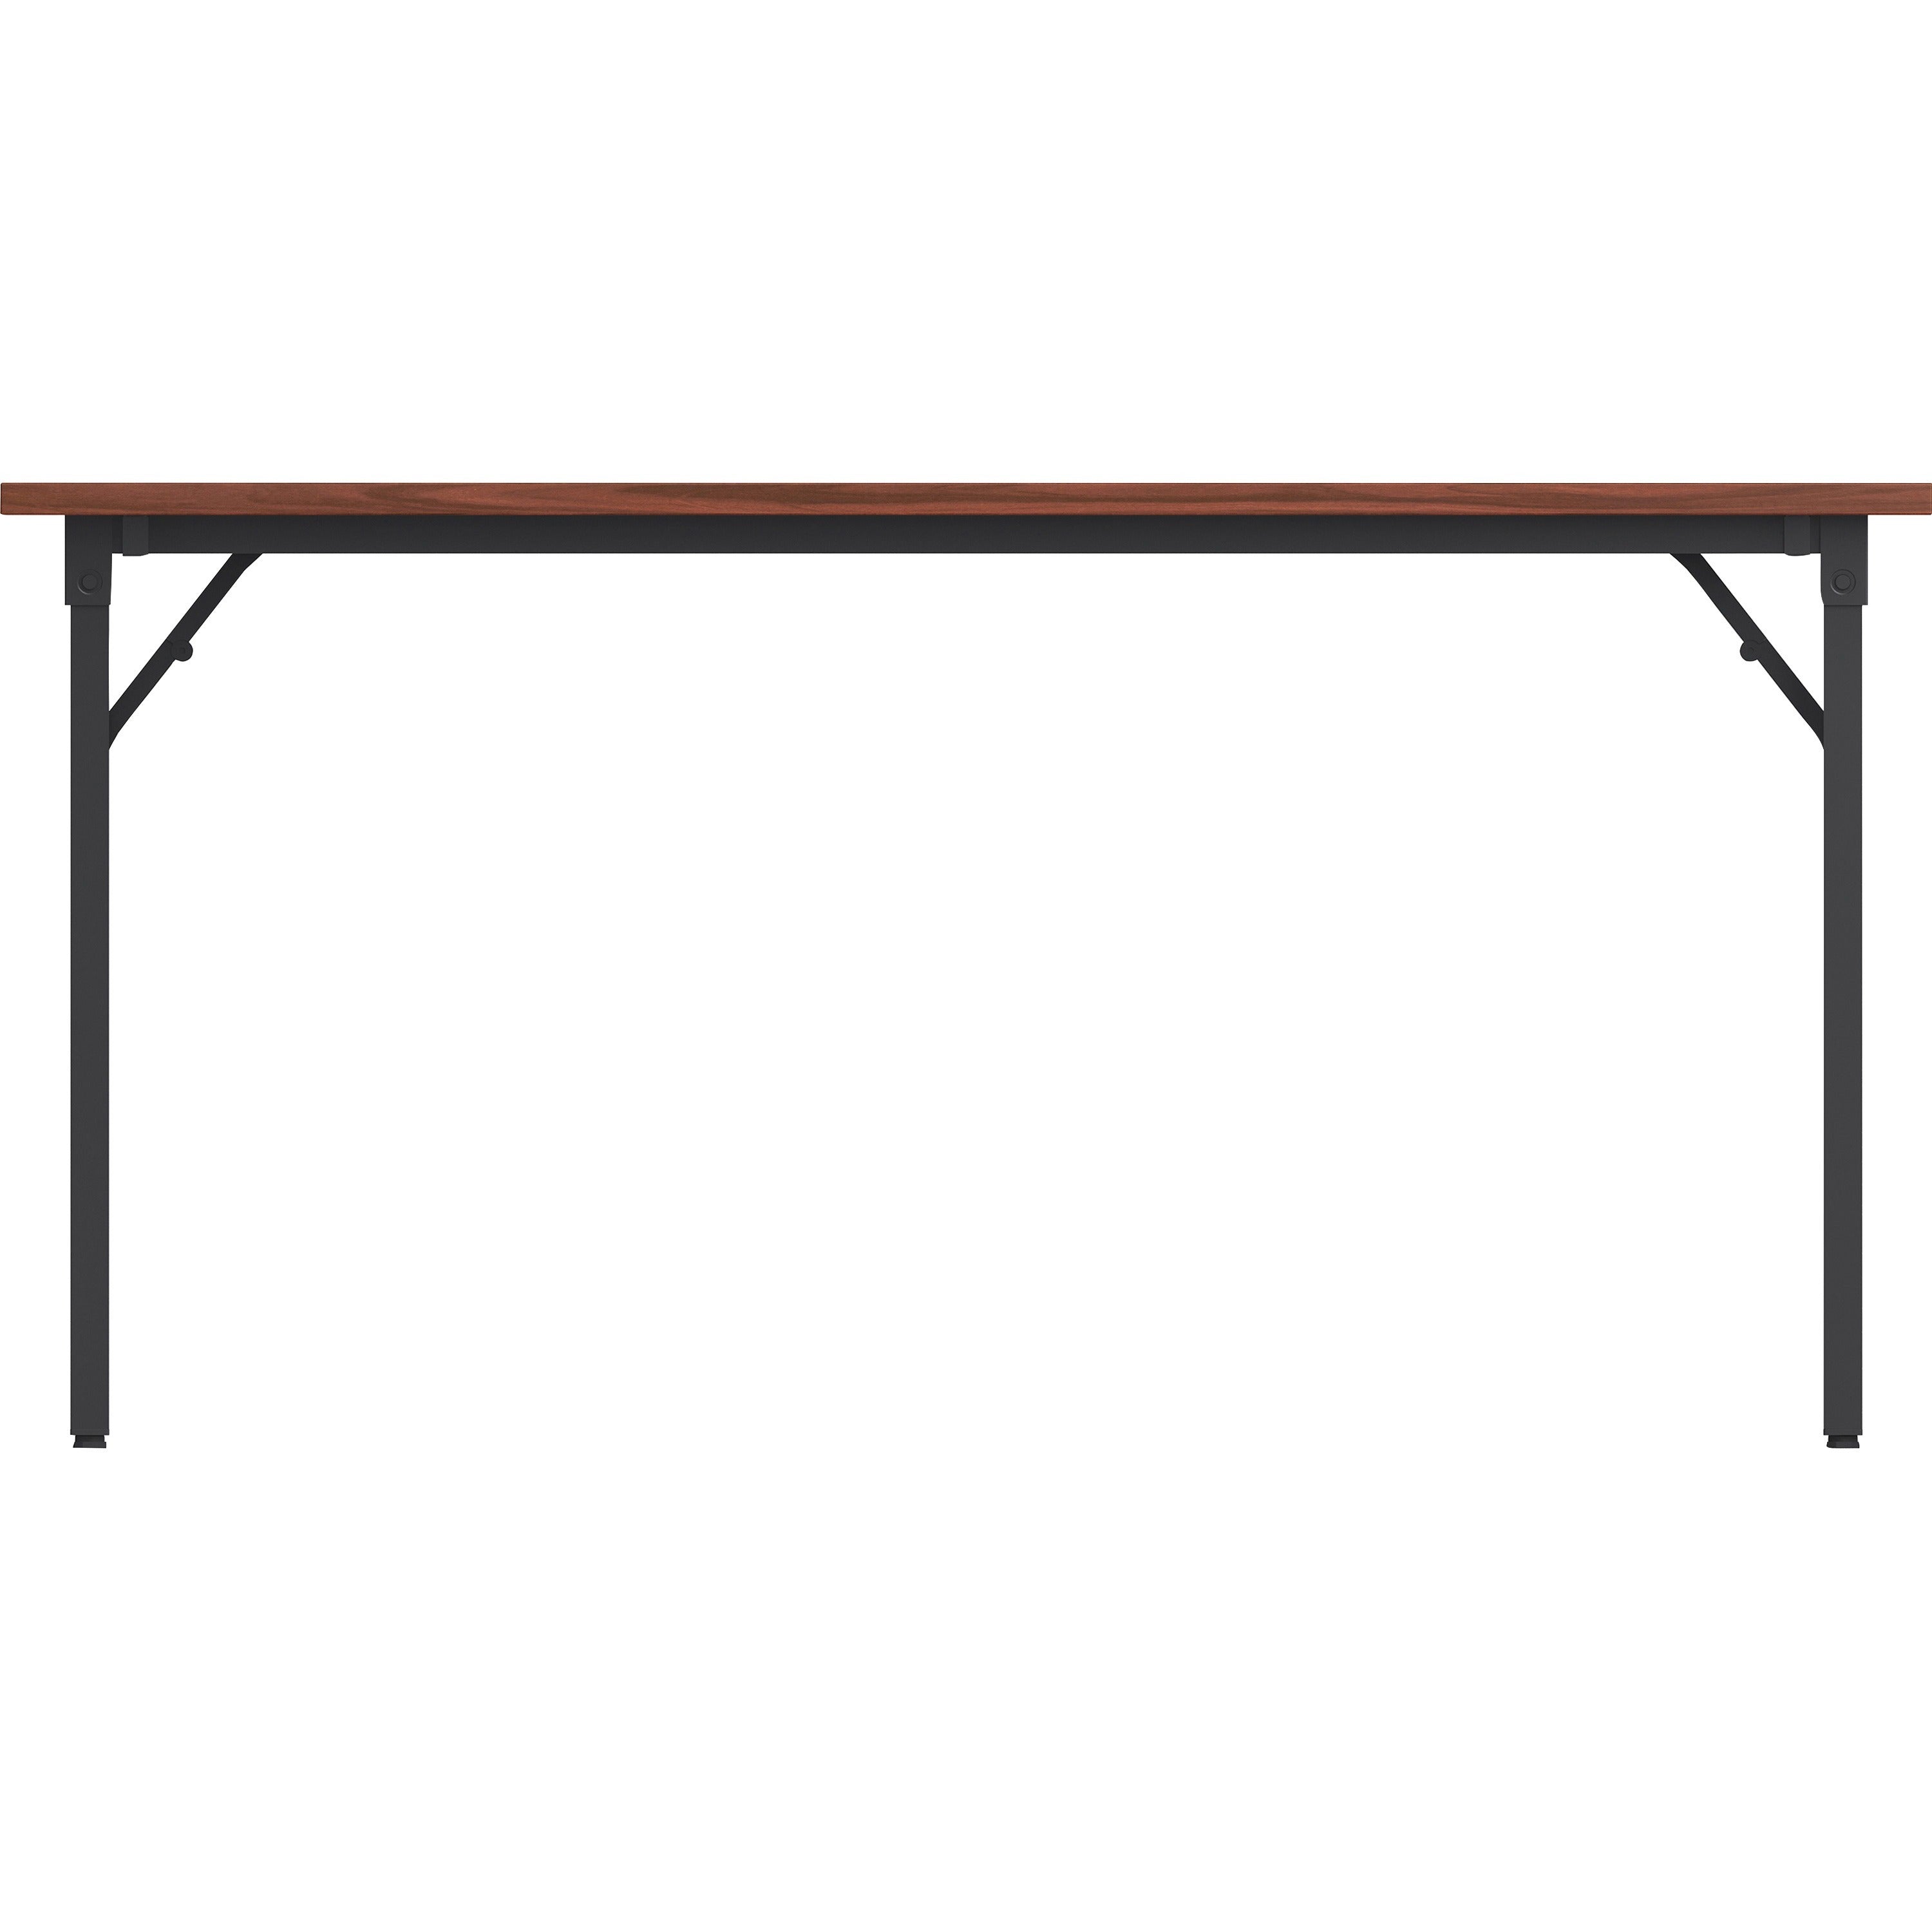 lorell-folding-training-table-for-table-topmelamine-top-x-60-table-top-width-x-18-table-top-depth-x-1-table-top-thickness-30-height-assembly-required-mahogany-1-each_llr60747 - 3